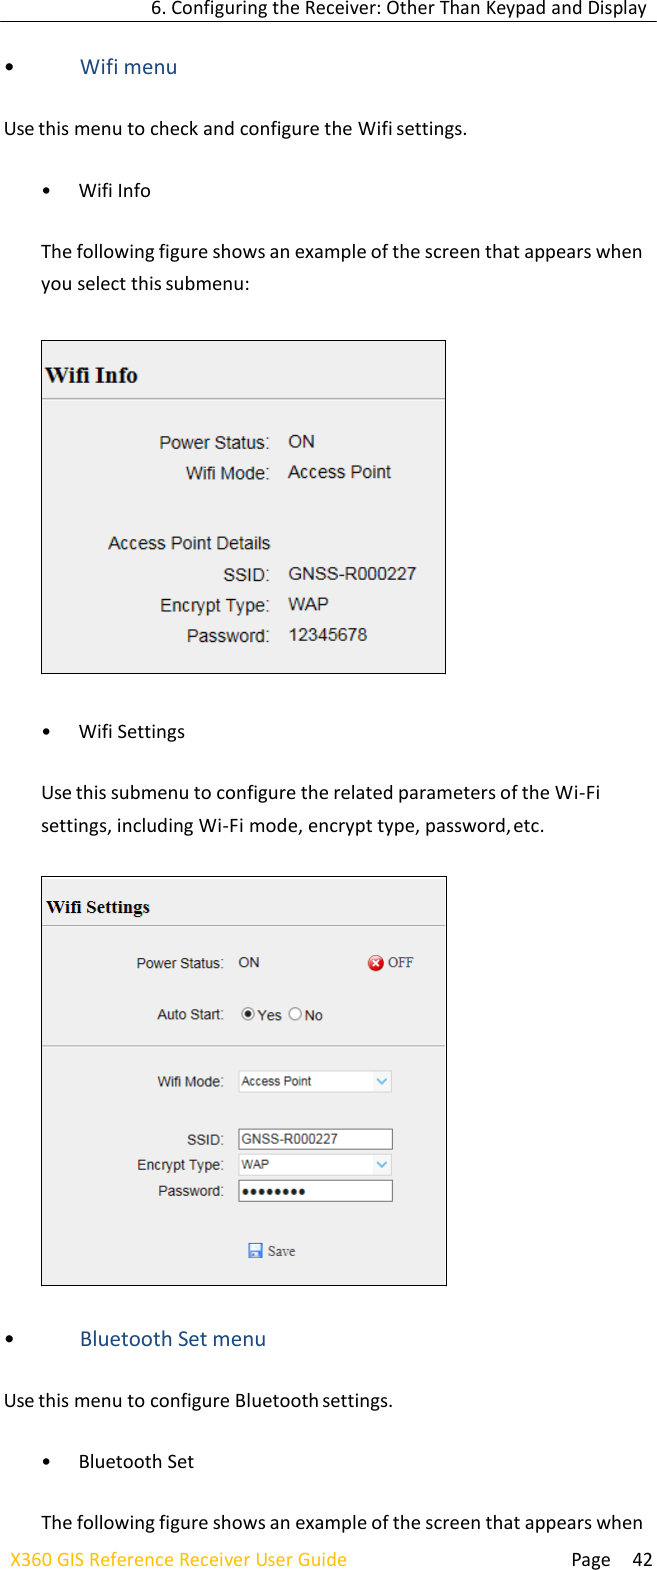 6. Configuring the Receiver: Other Than Keypad and Display  Page 42 X360 GIS Reference Receiver User Guide    • Wifi menu  Use this menu to check and configure the Wifi settings.  • Wifi Info  The following figure shows an example of the screen that appears when you select this submenu:    • Wifi Settings  Use this submenu to configure the related parameters of the Wi-Fi settings, including Wi-Fi mode, encrypt type, password, etc.    • Bluetooth Set menu  Use this menu to configure Bluetooth settings.  • Bluetooth Set  The following figure shows an example of the screen that appears when     